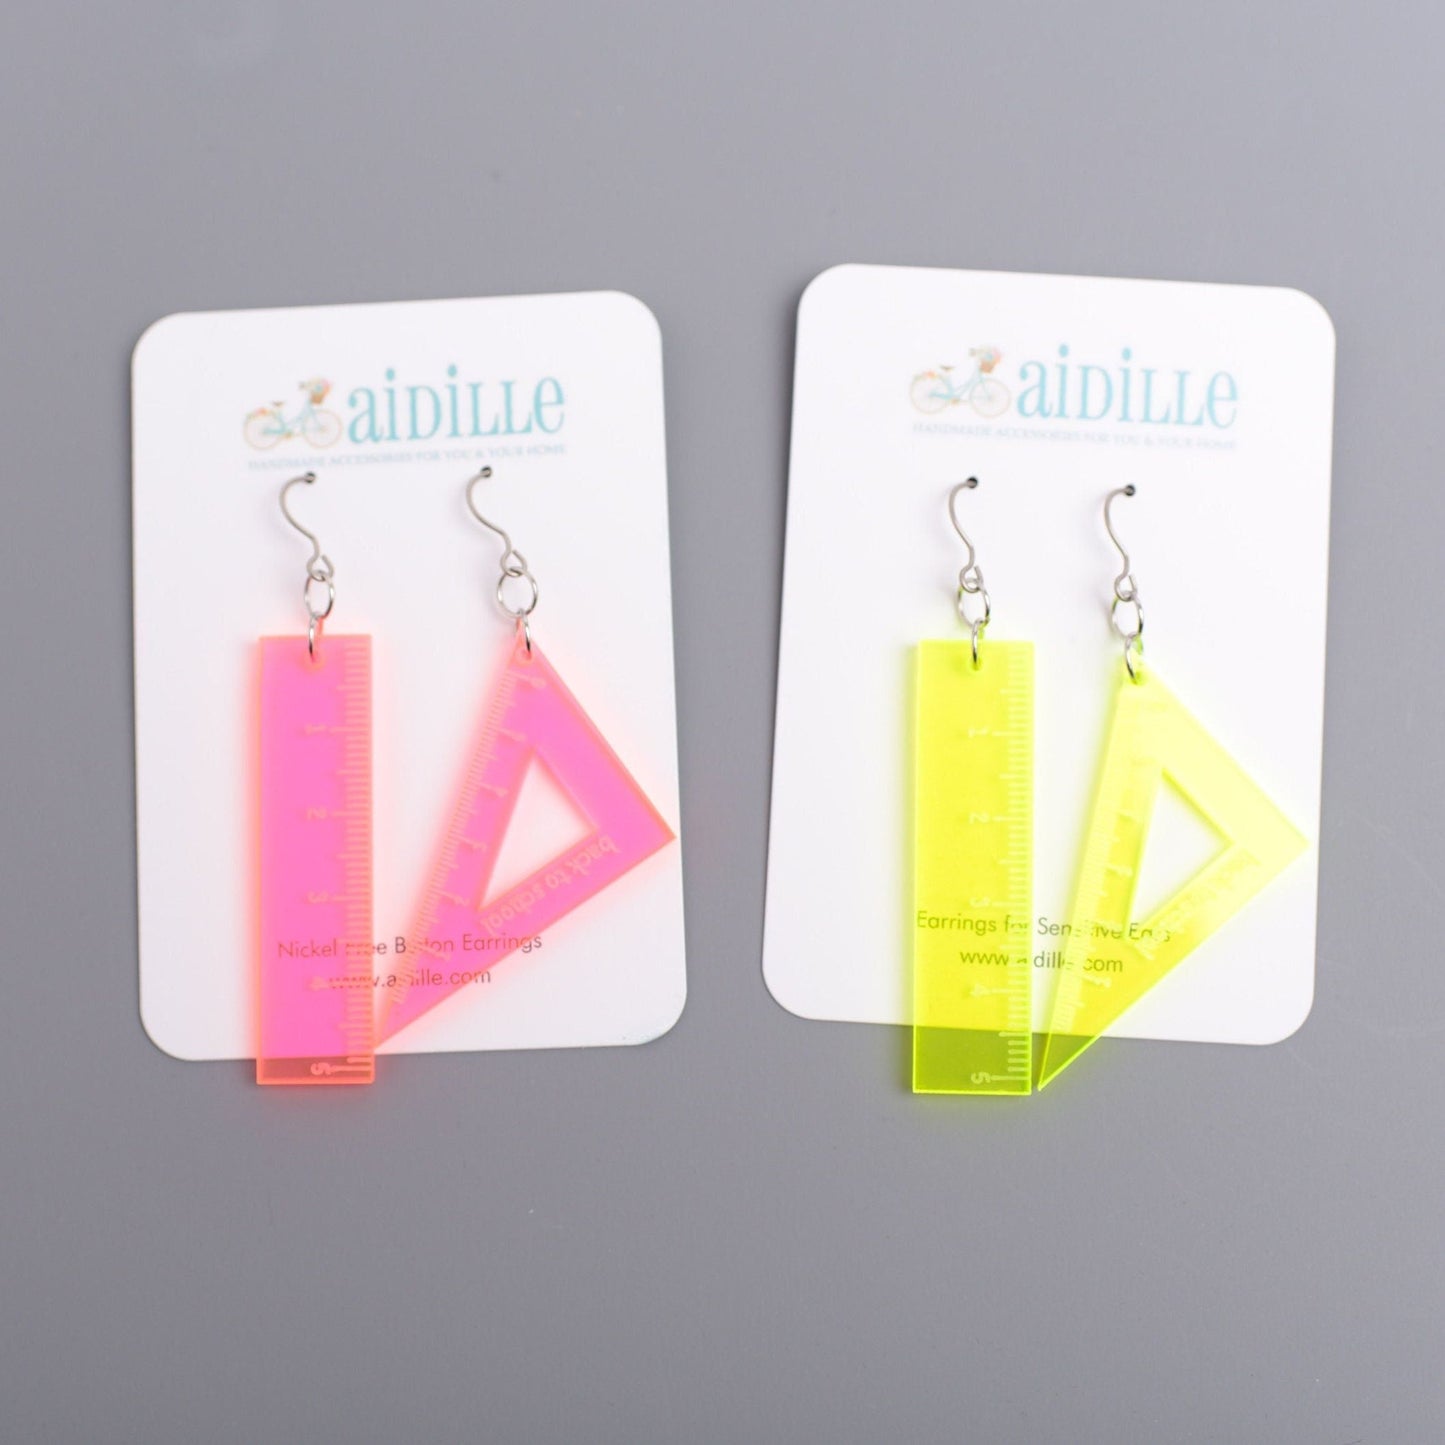 Geometry Ruler Earrings with Titanium Ear Wires- Neon Pink or Yellow